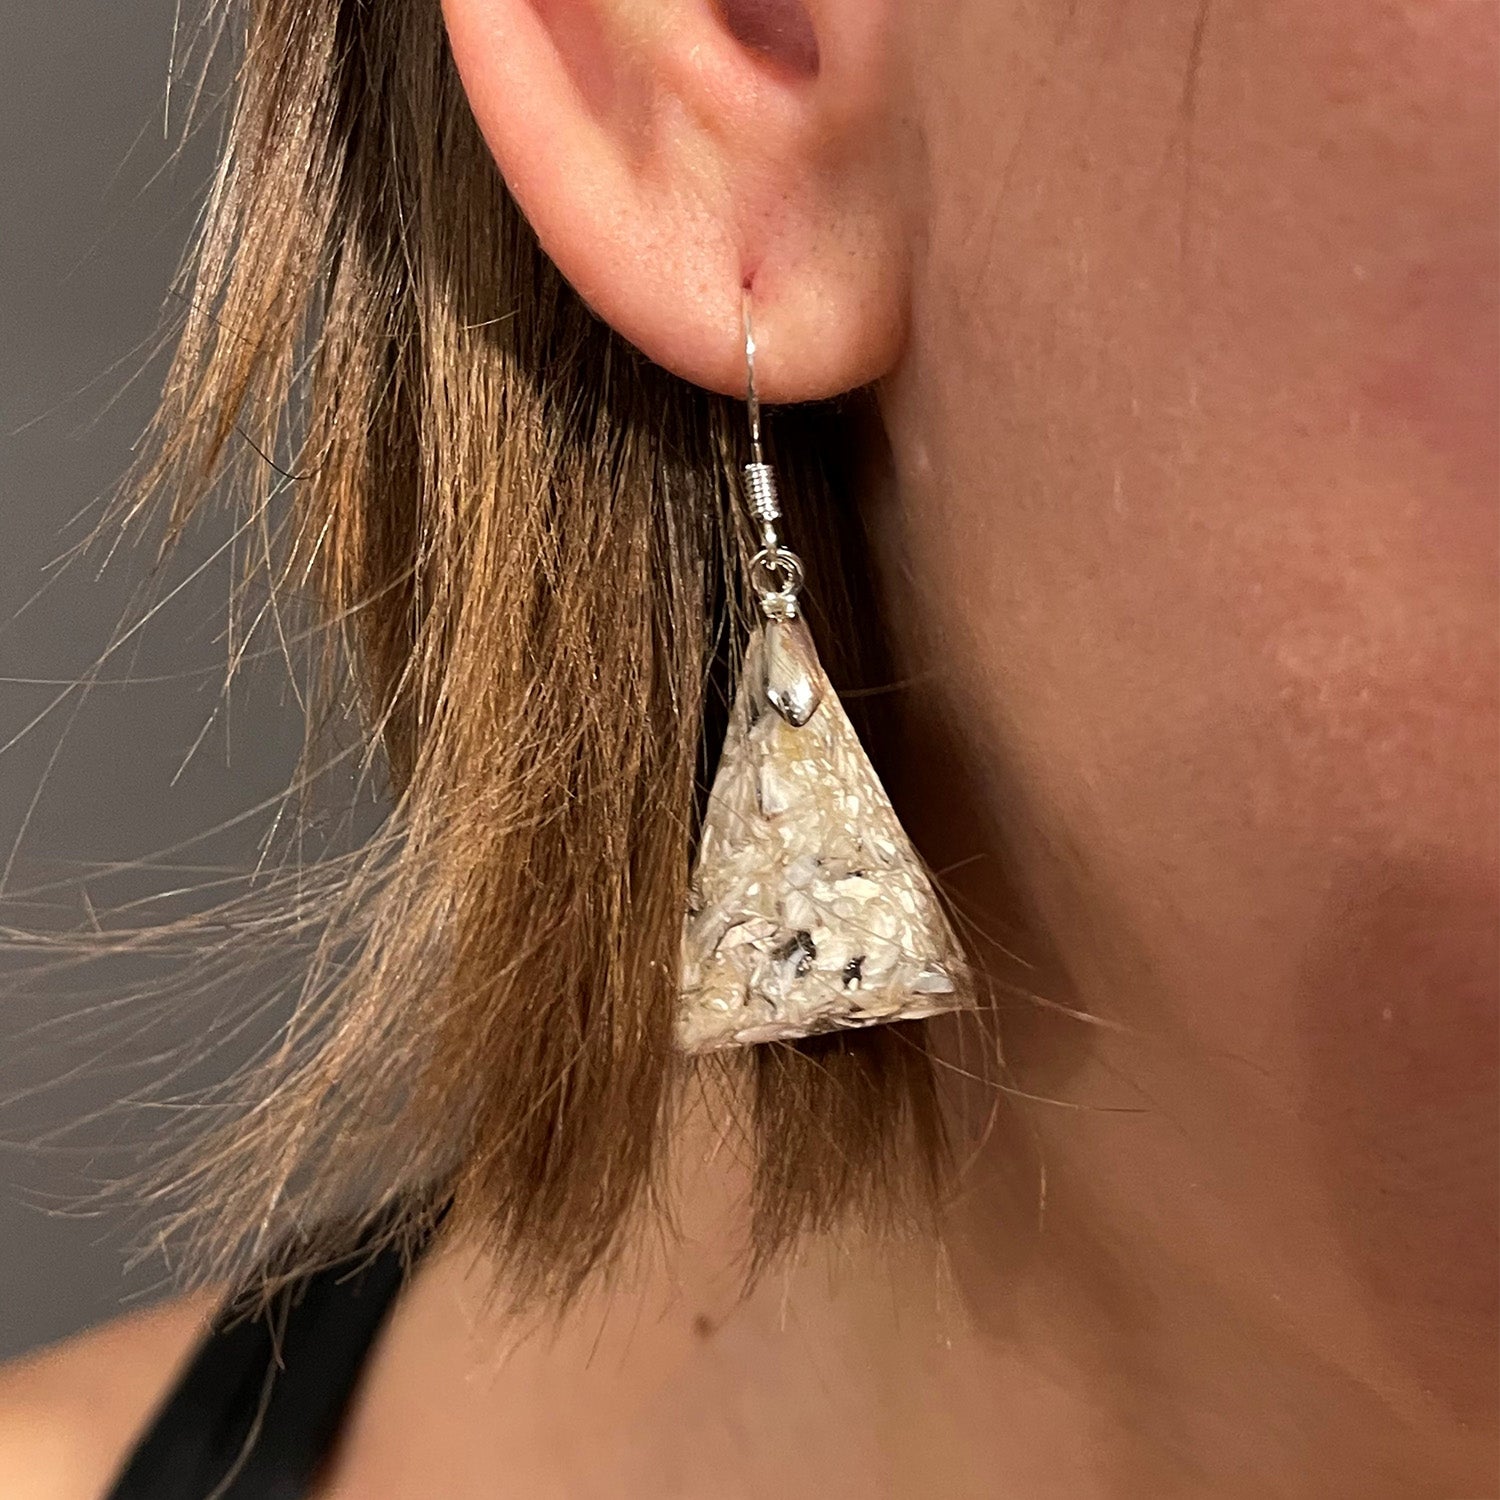 Triangle earrings made from recycled oyster shells